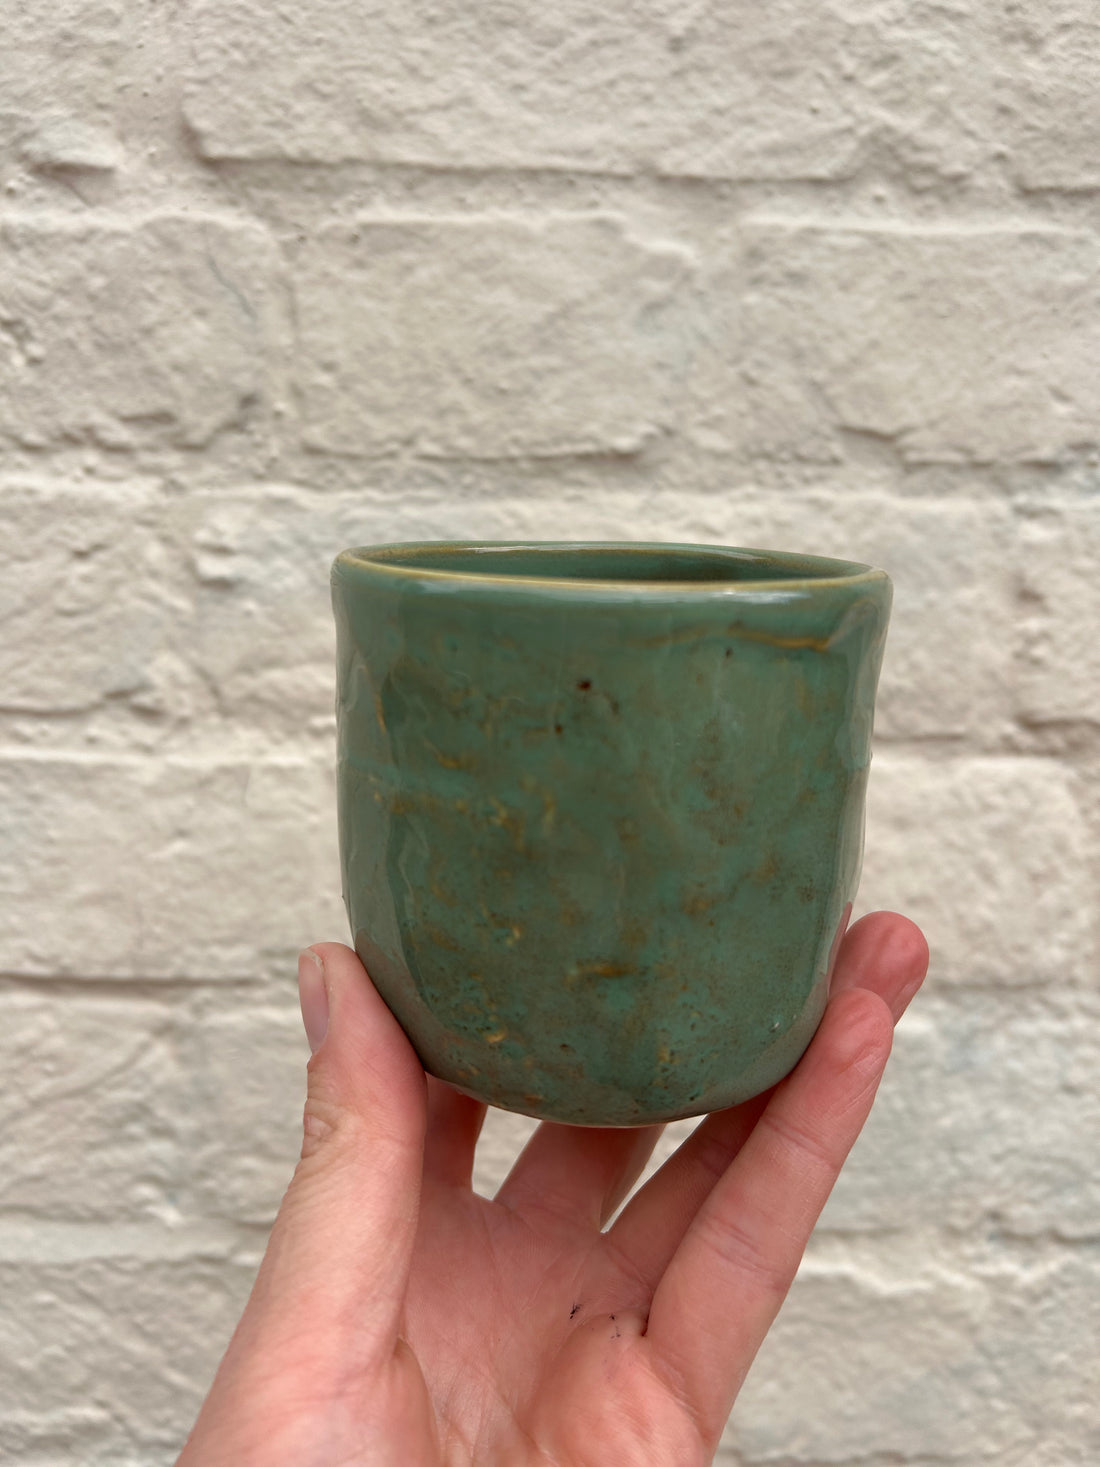 Small ceramic pots to house nursery pots 7cm or below